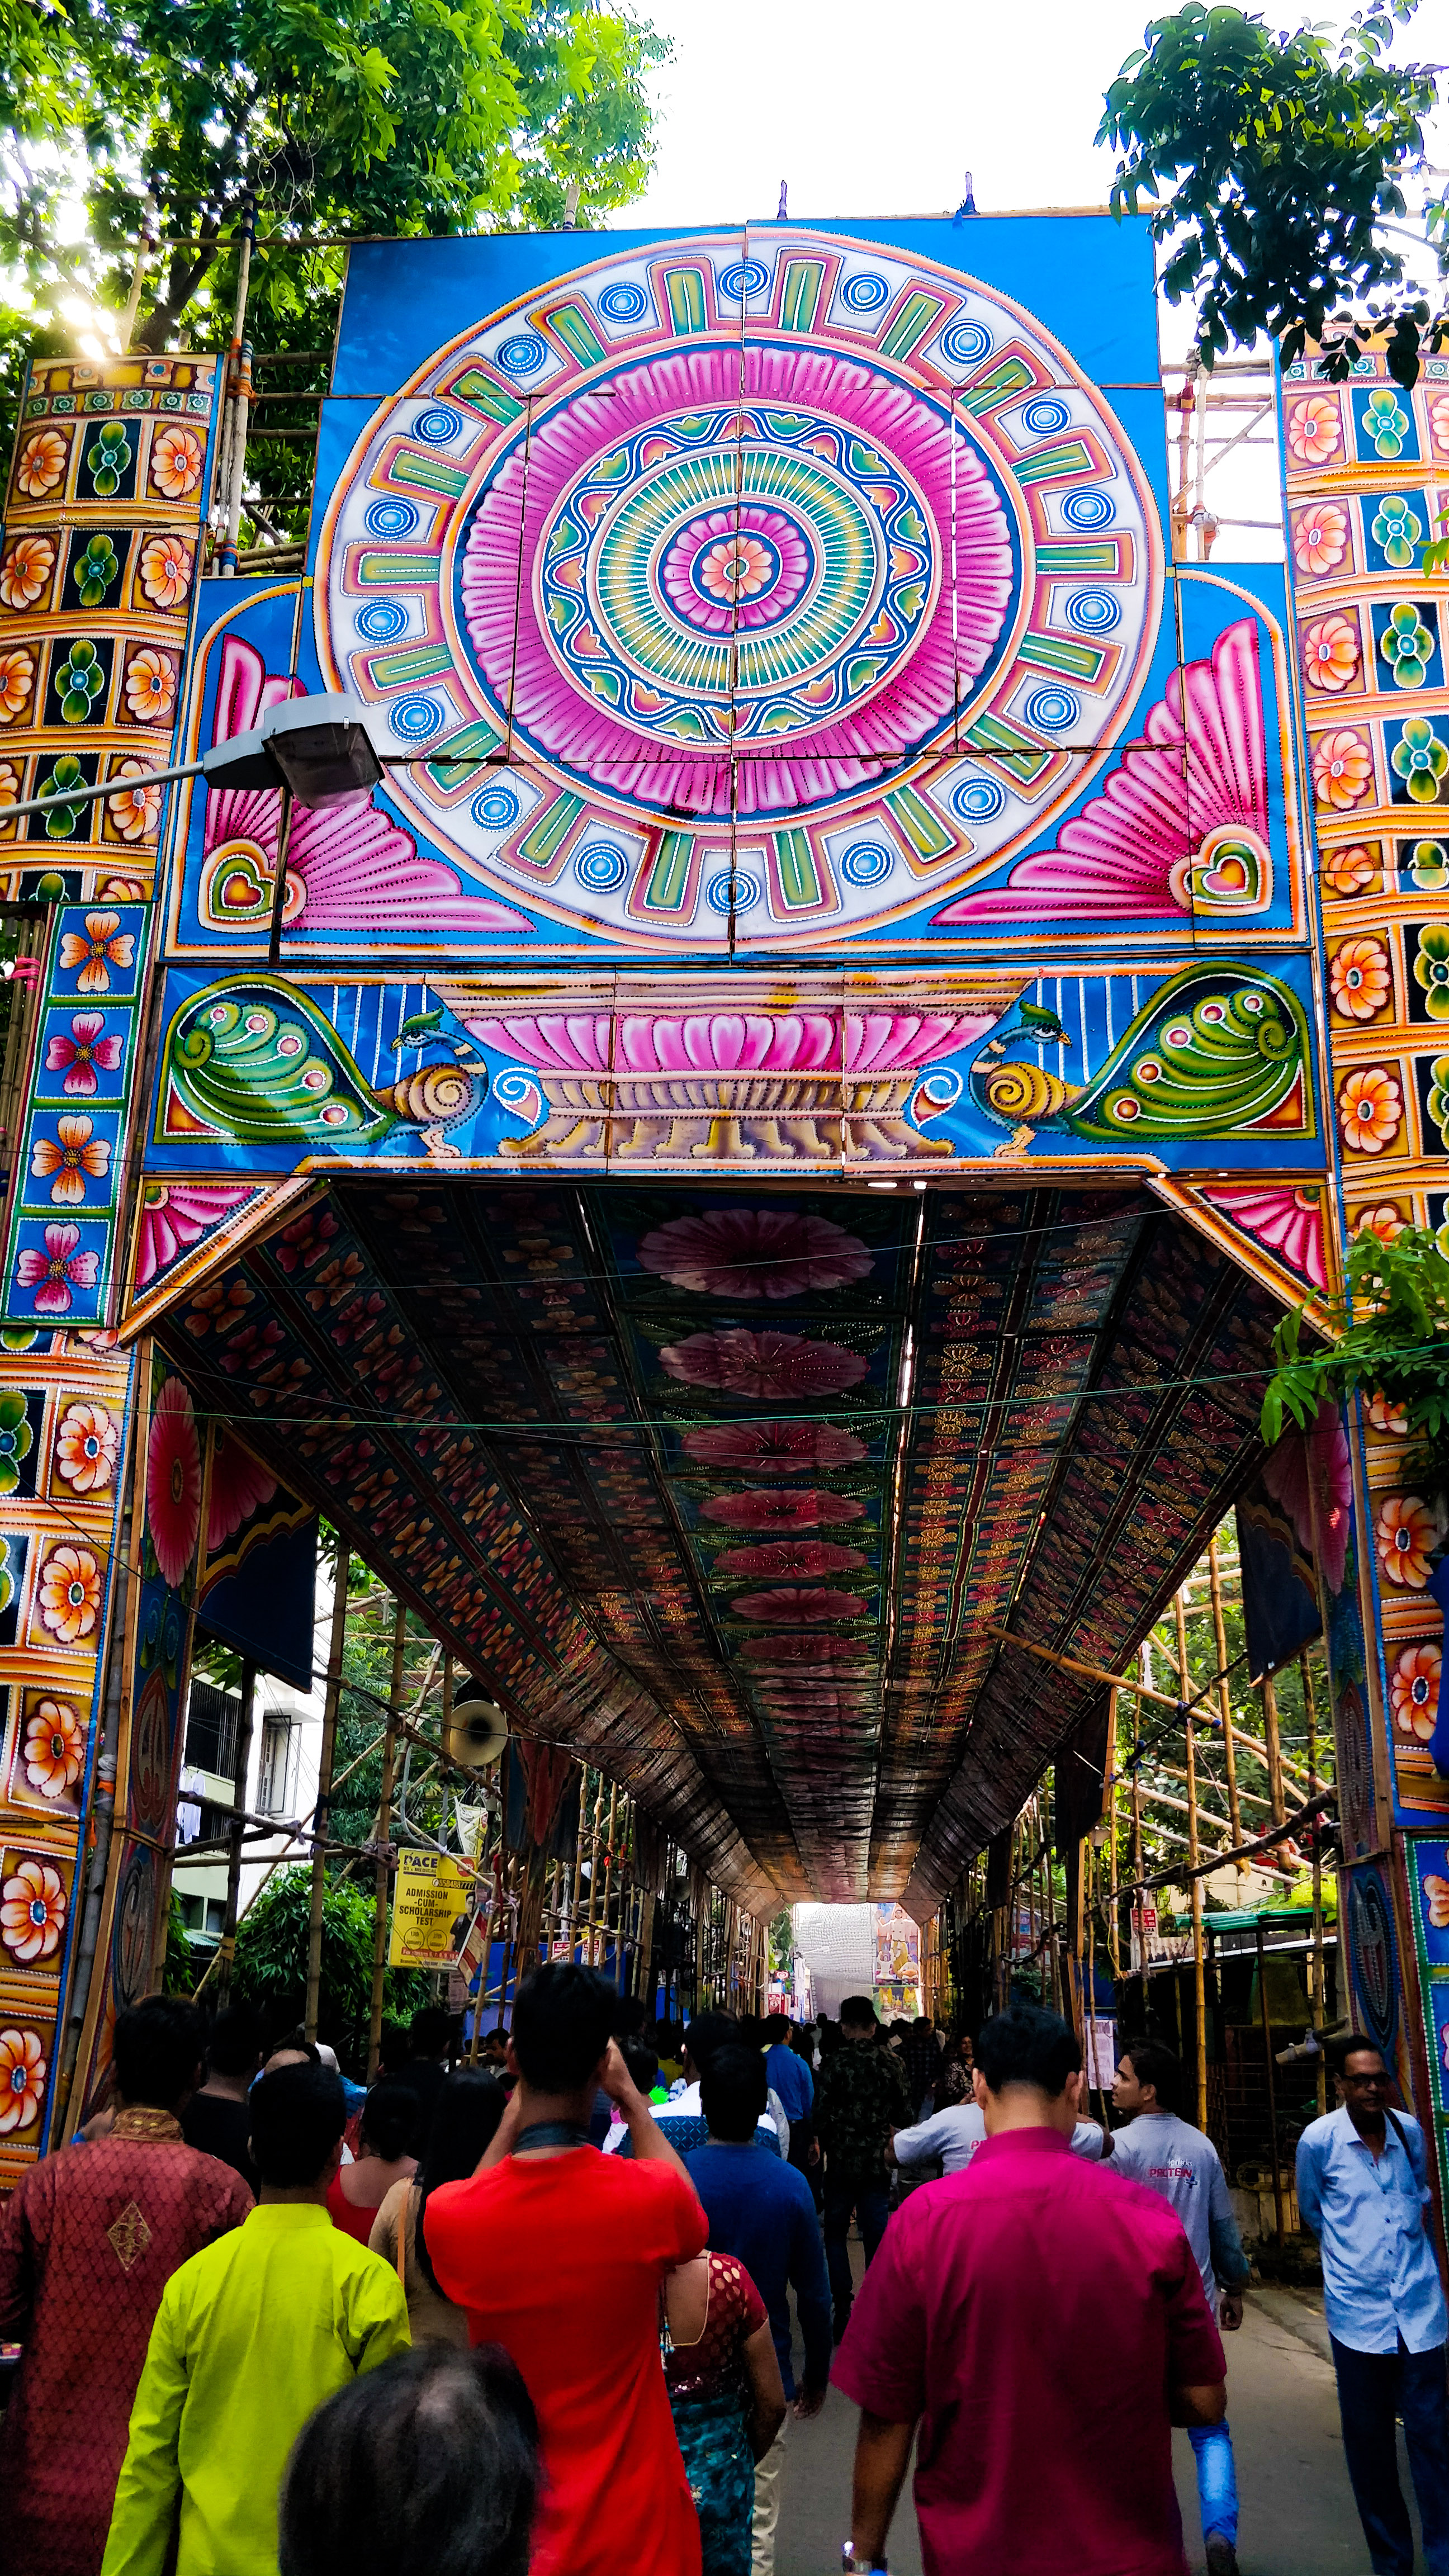 Large archways like these are built all over the city for Durga Pujo